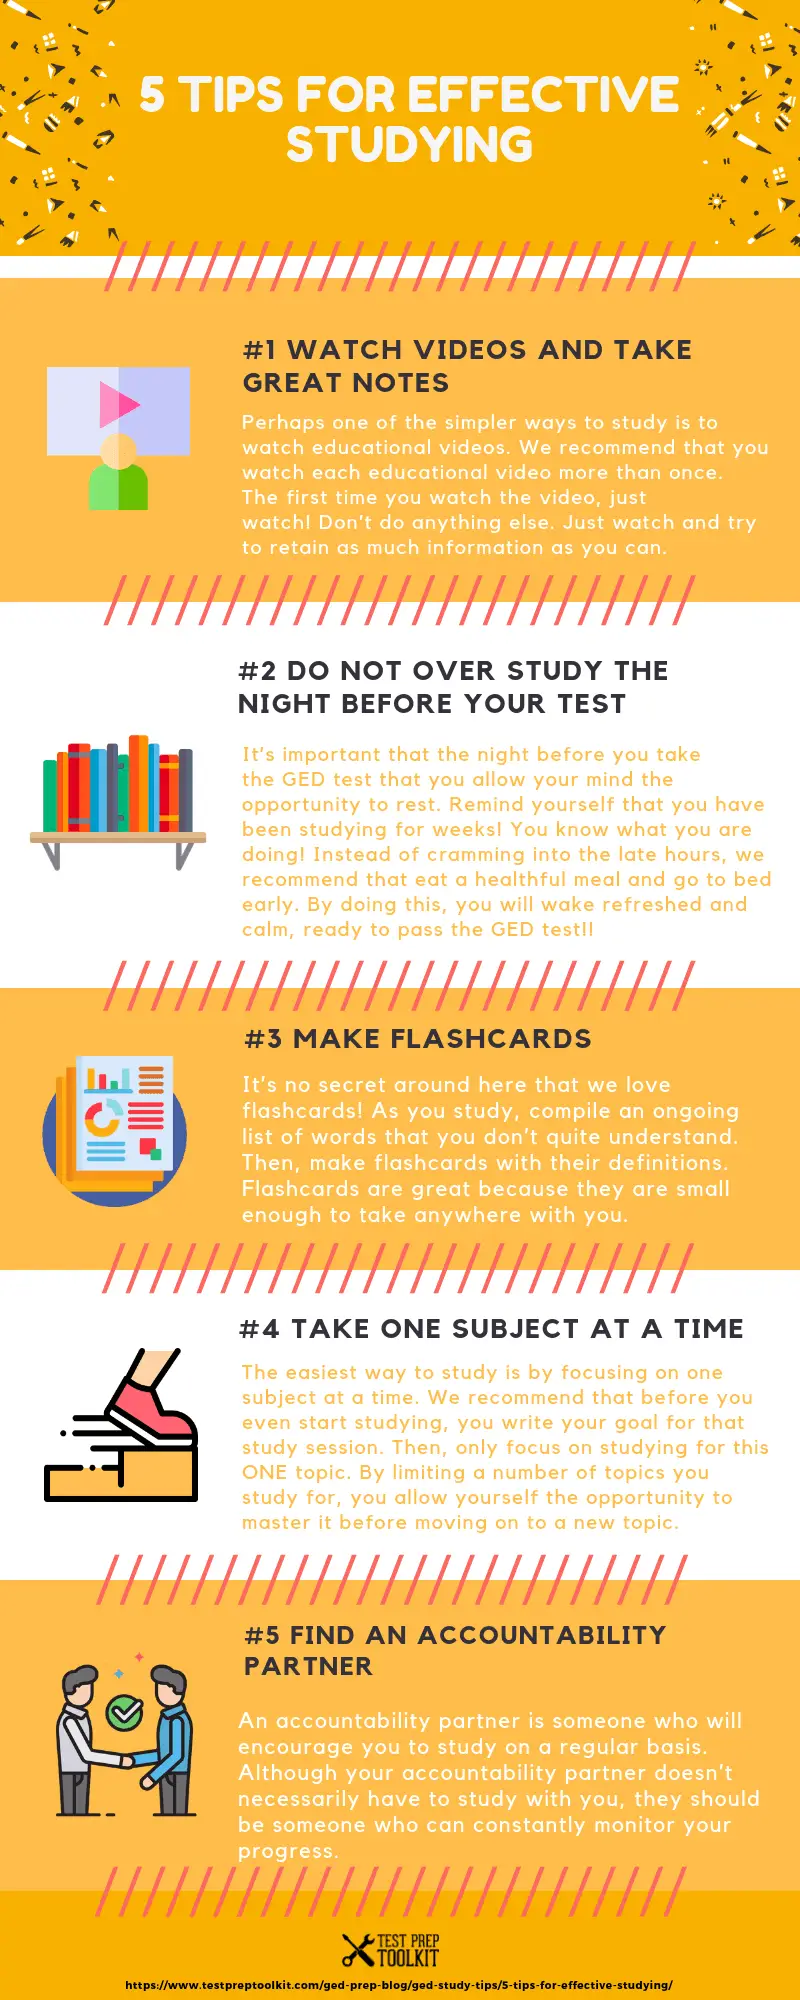 Tips for Effective Studying